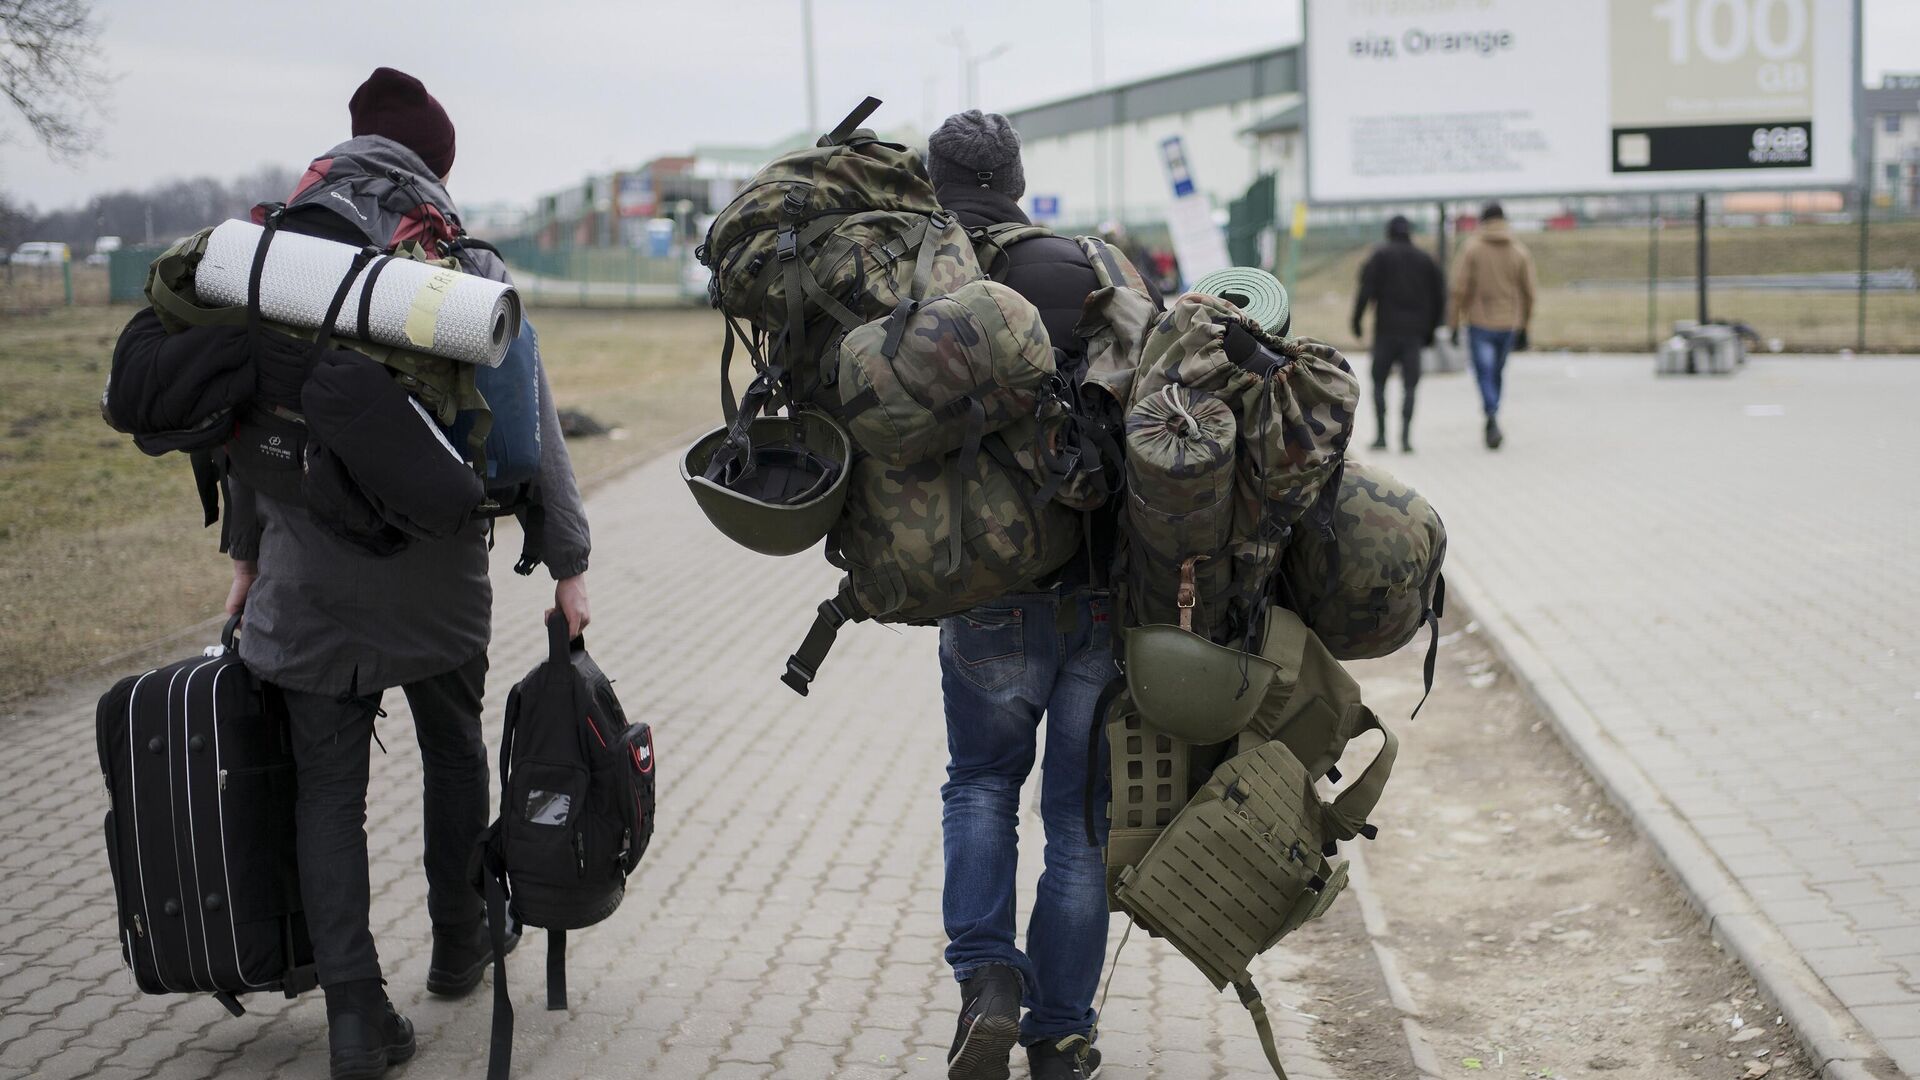 A man carries combat gear as he leaves Poland to fight in Ukraine, at the border crossing in Medyka, Poland, Wednesday, March 2, 2022 - Sputnik International, 1920, 30.03.2022